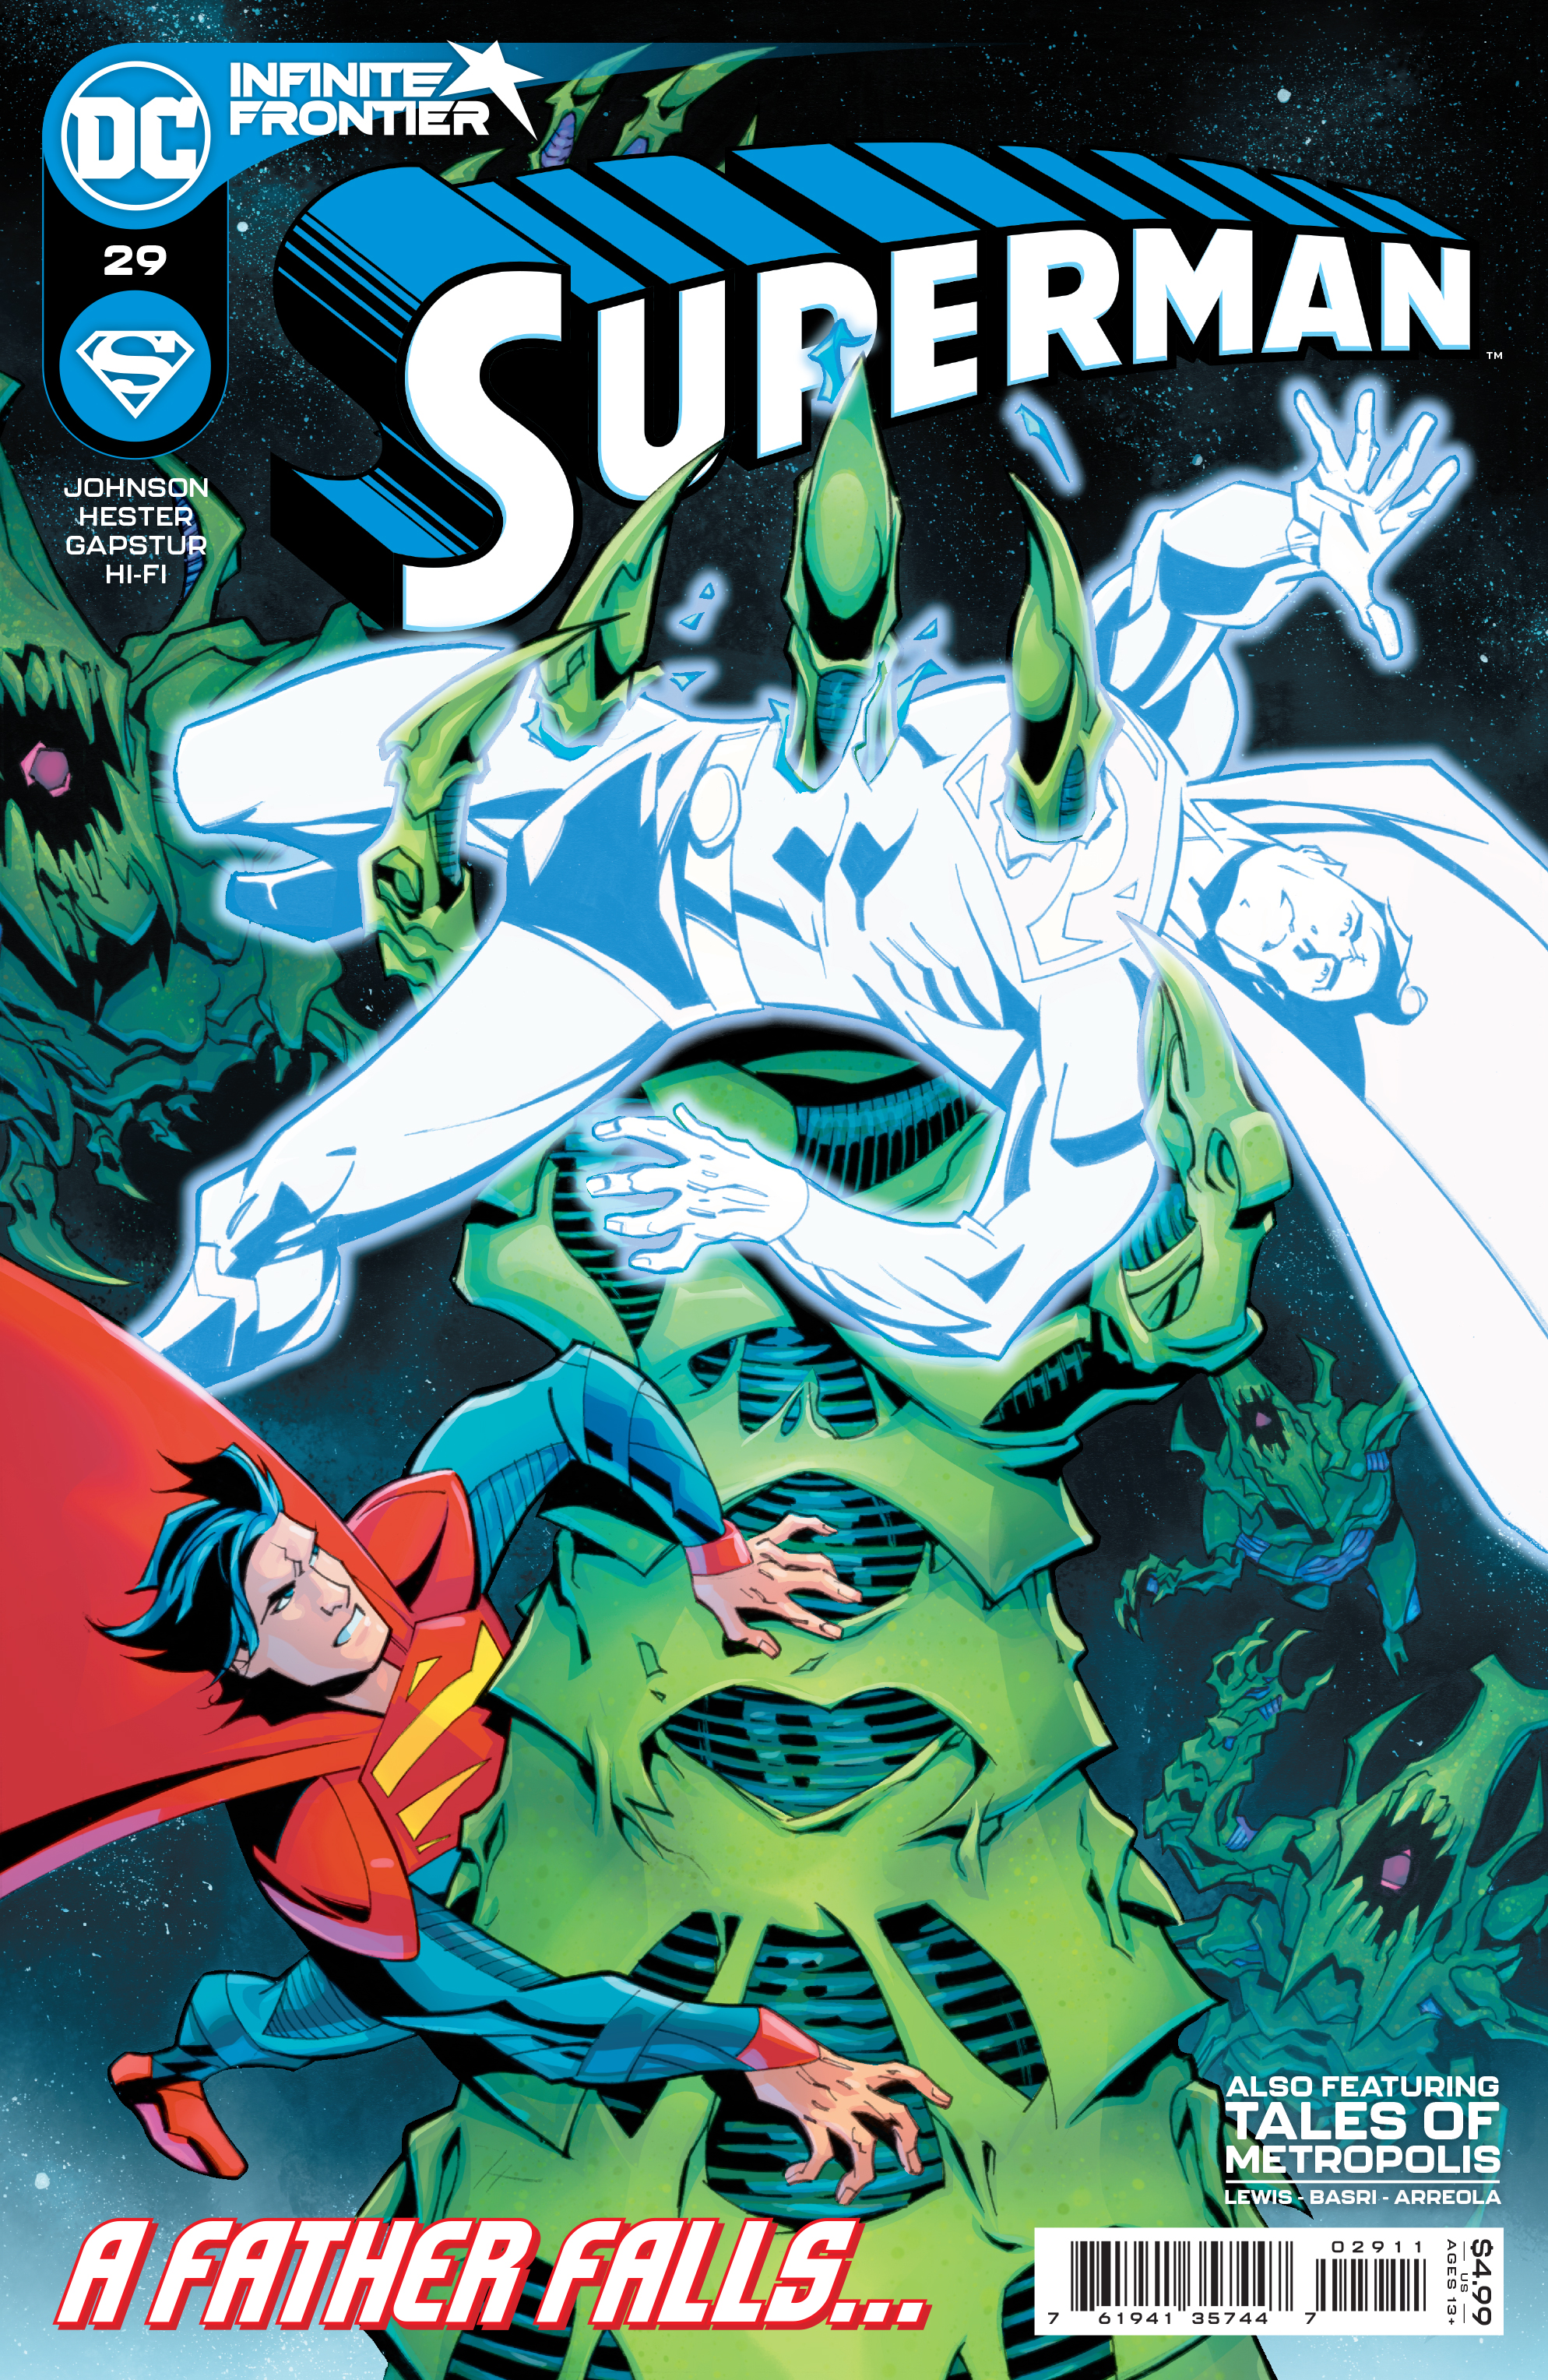 Superman #29 Cover A Phil Hester (2018)